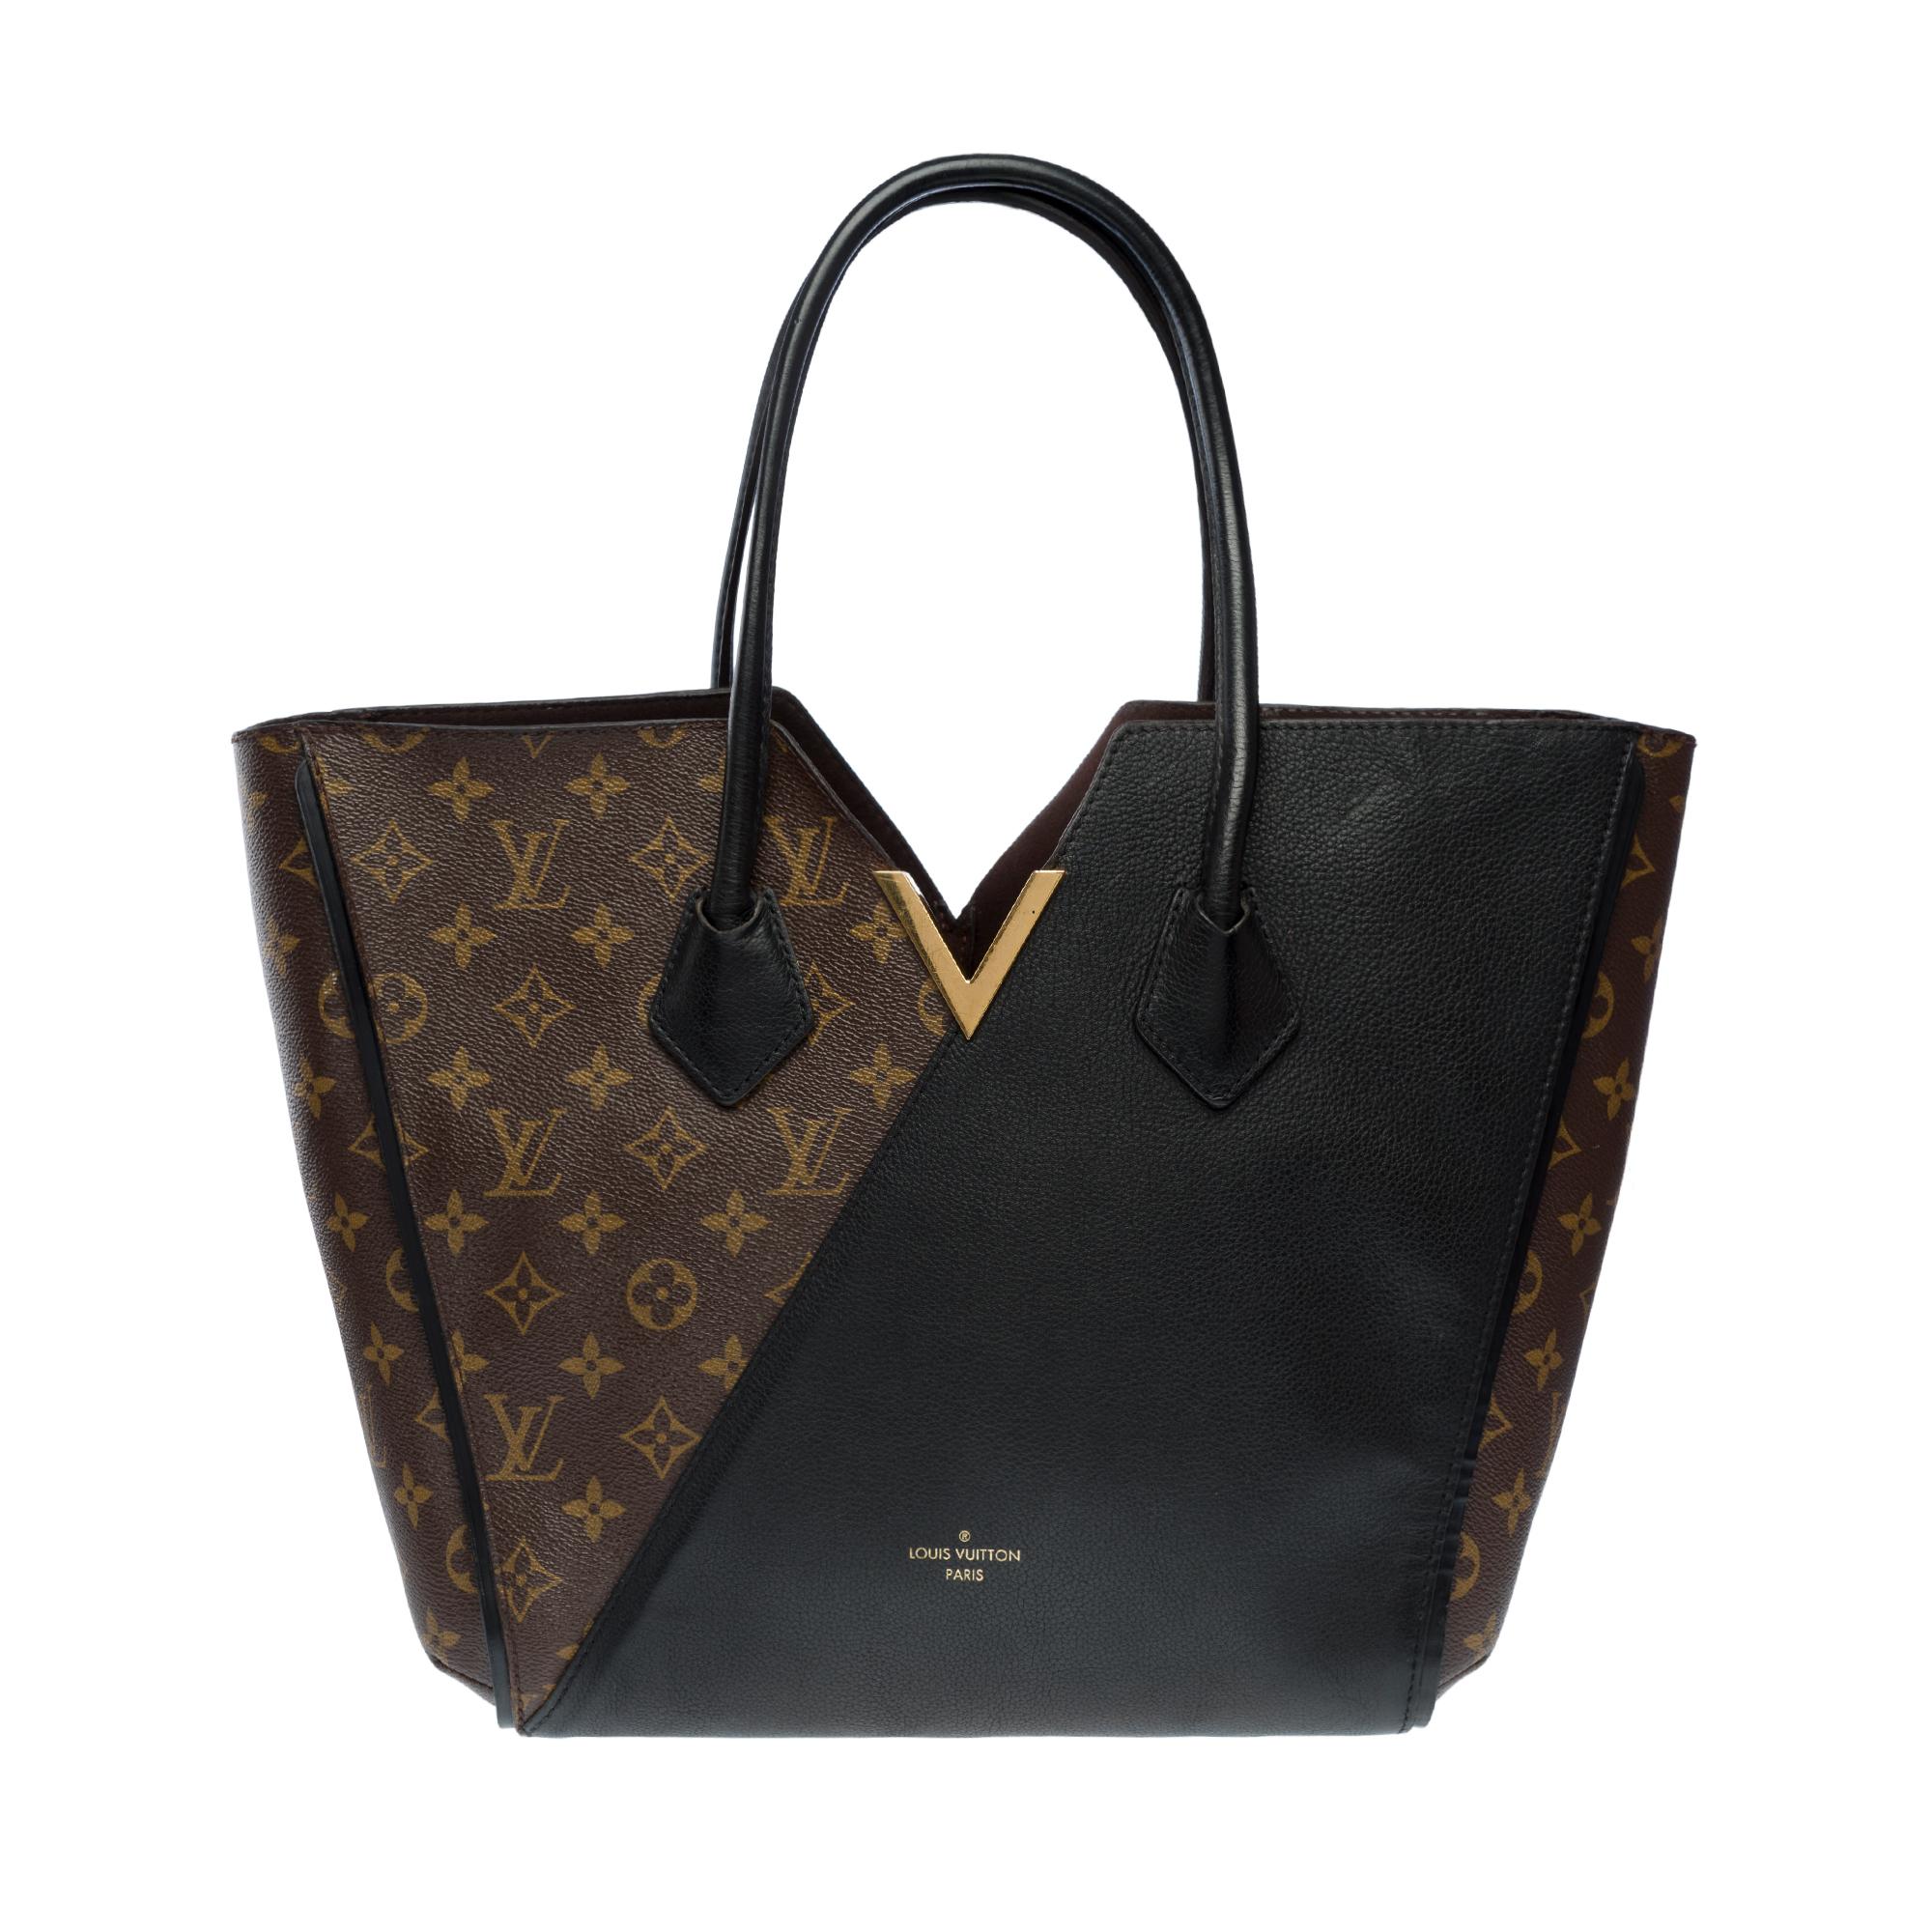 Louis​ ​Vuitton​ ​Kimono​ ​Tote​ ​bag​ ​in​ ​Monogram​ ​canvas​ ​seduces​ ​by​ ​its​ ​lightness​ ​and​ ​spacious​ ​capacity​ ​that​ ​make​ ​it​ ​an​ ​ideal​ ​model​ ​for​ ​everyday​ ​life.​ ​Details​ ​in​ ​natural​ ​cow​ ​leather​ ​and​ ​shiny​